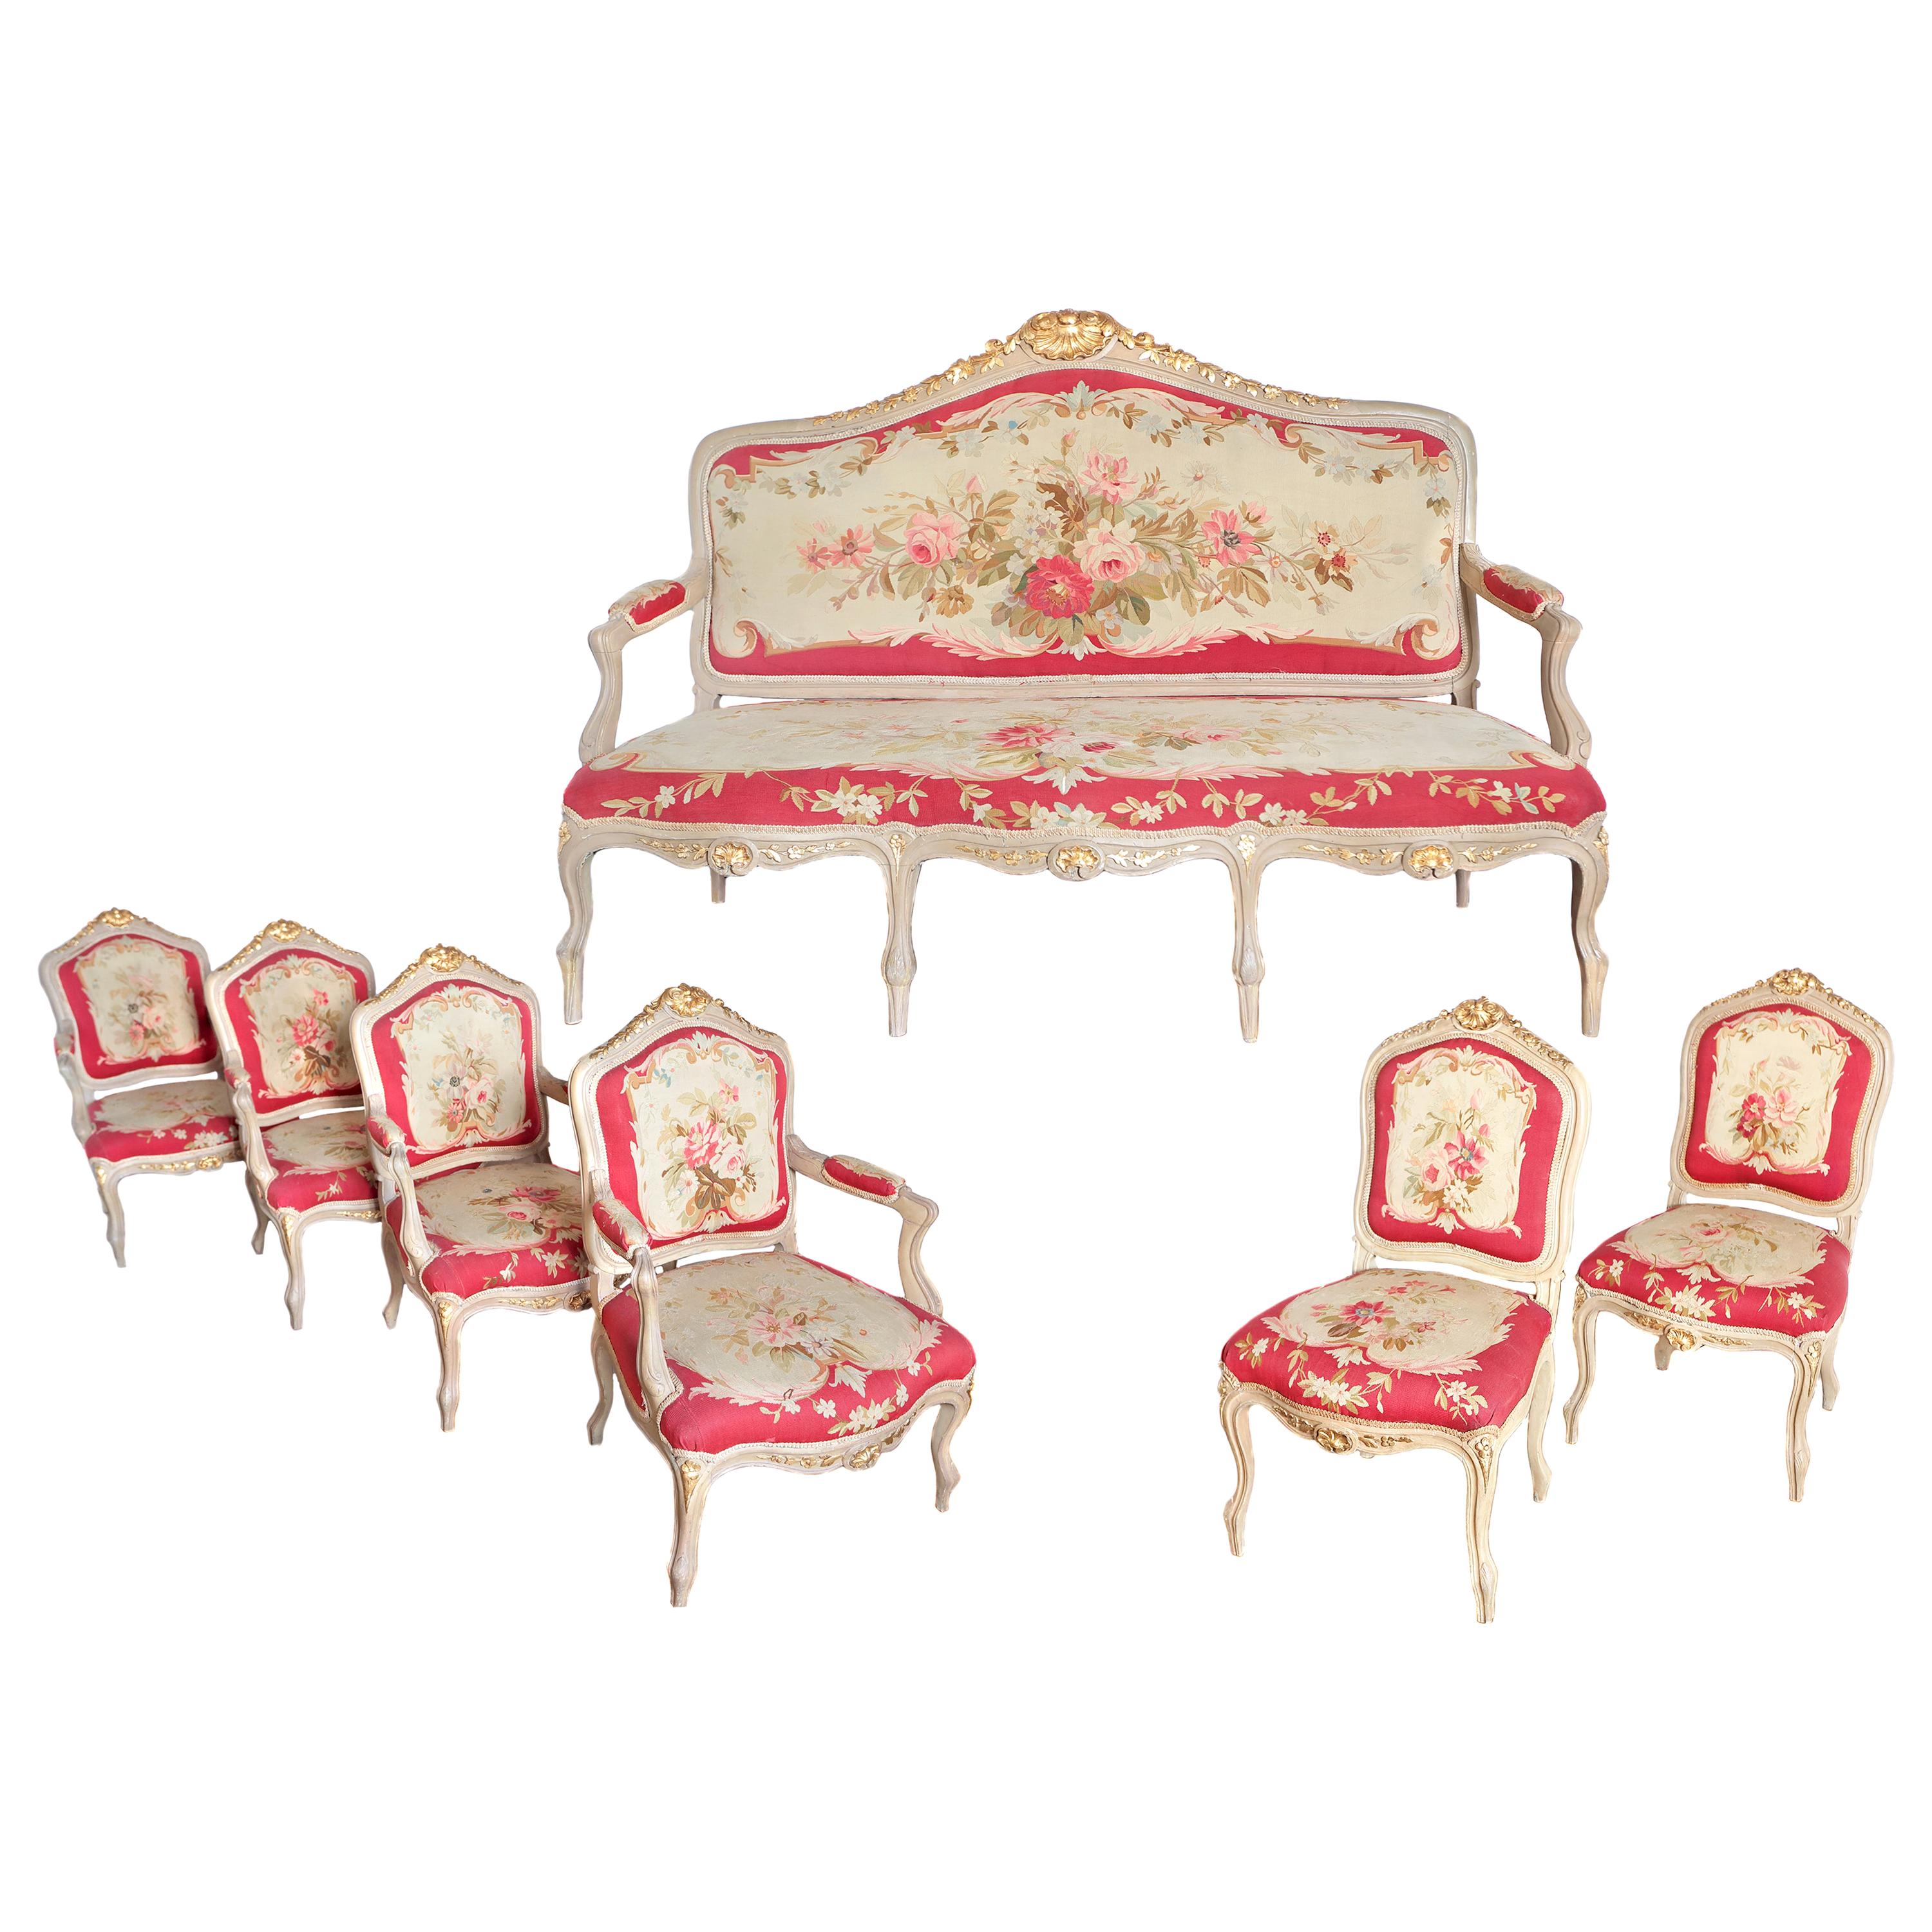 Large 19th Century Suite of Louis XV Style Aubusson Tapestry Chairs and Settee